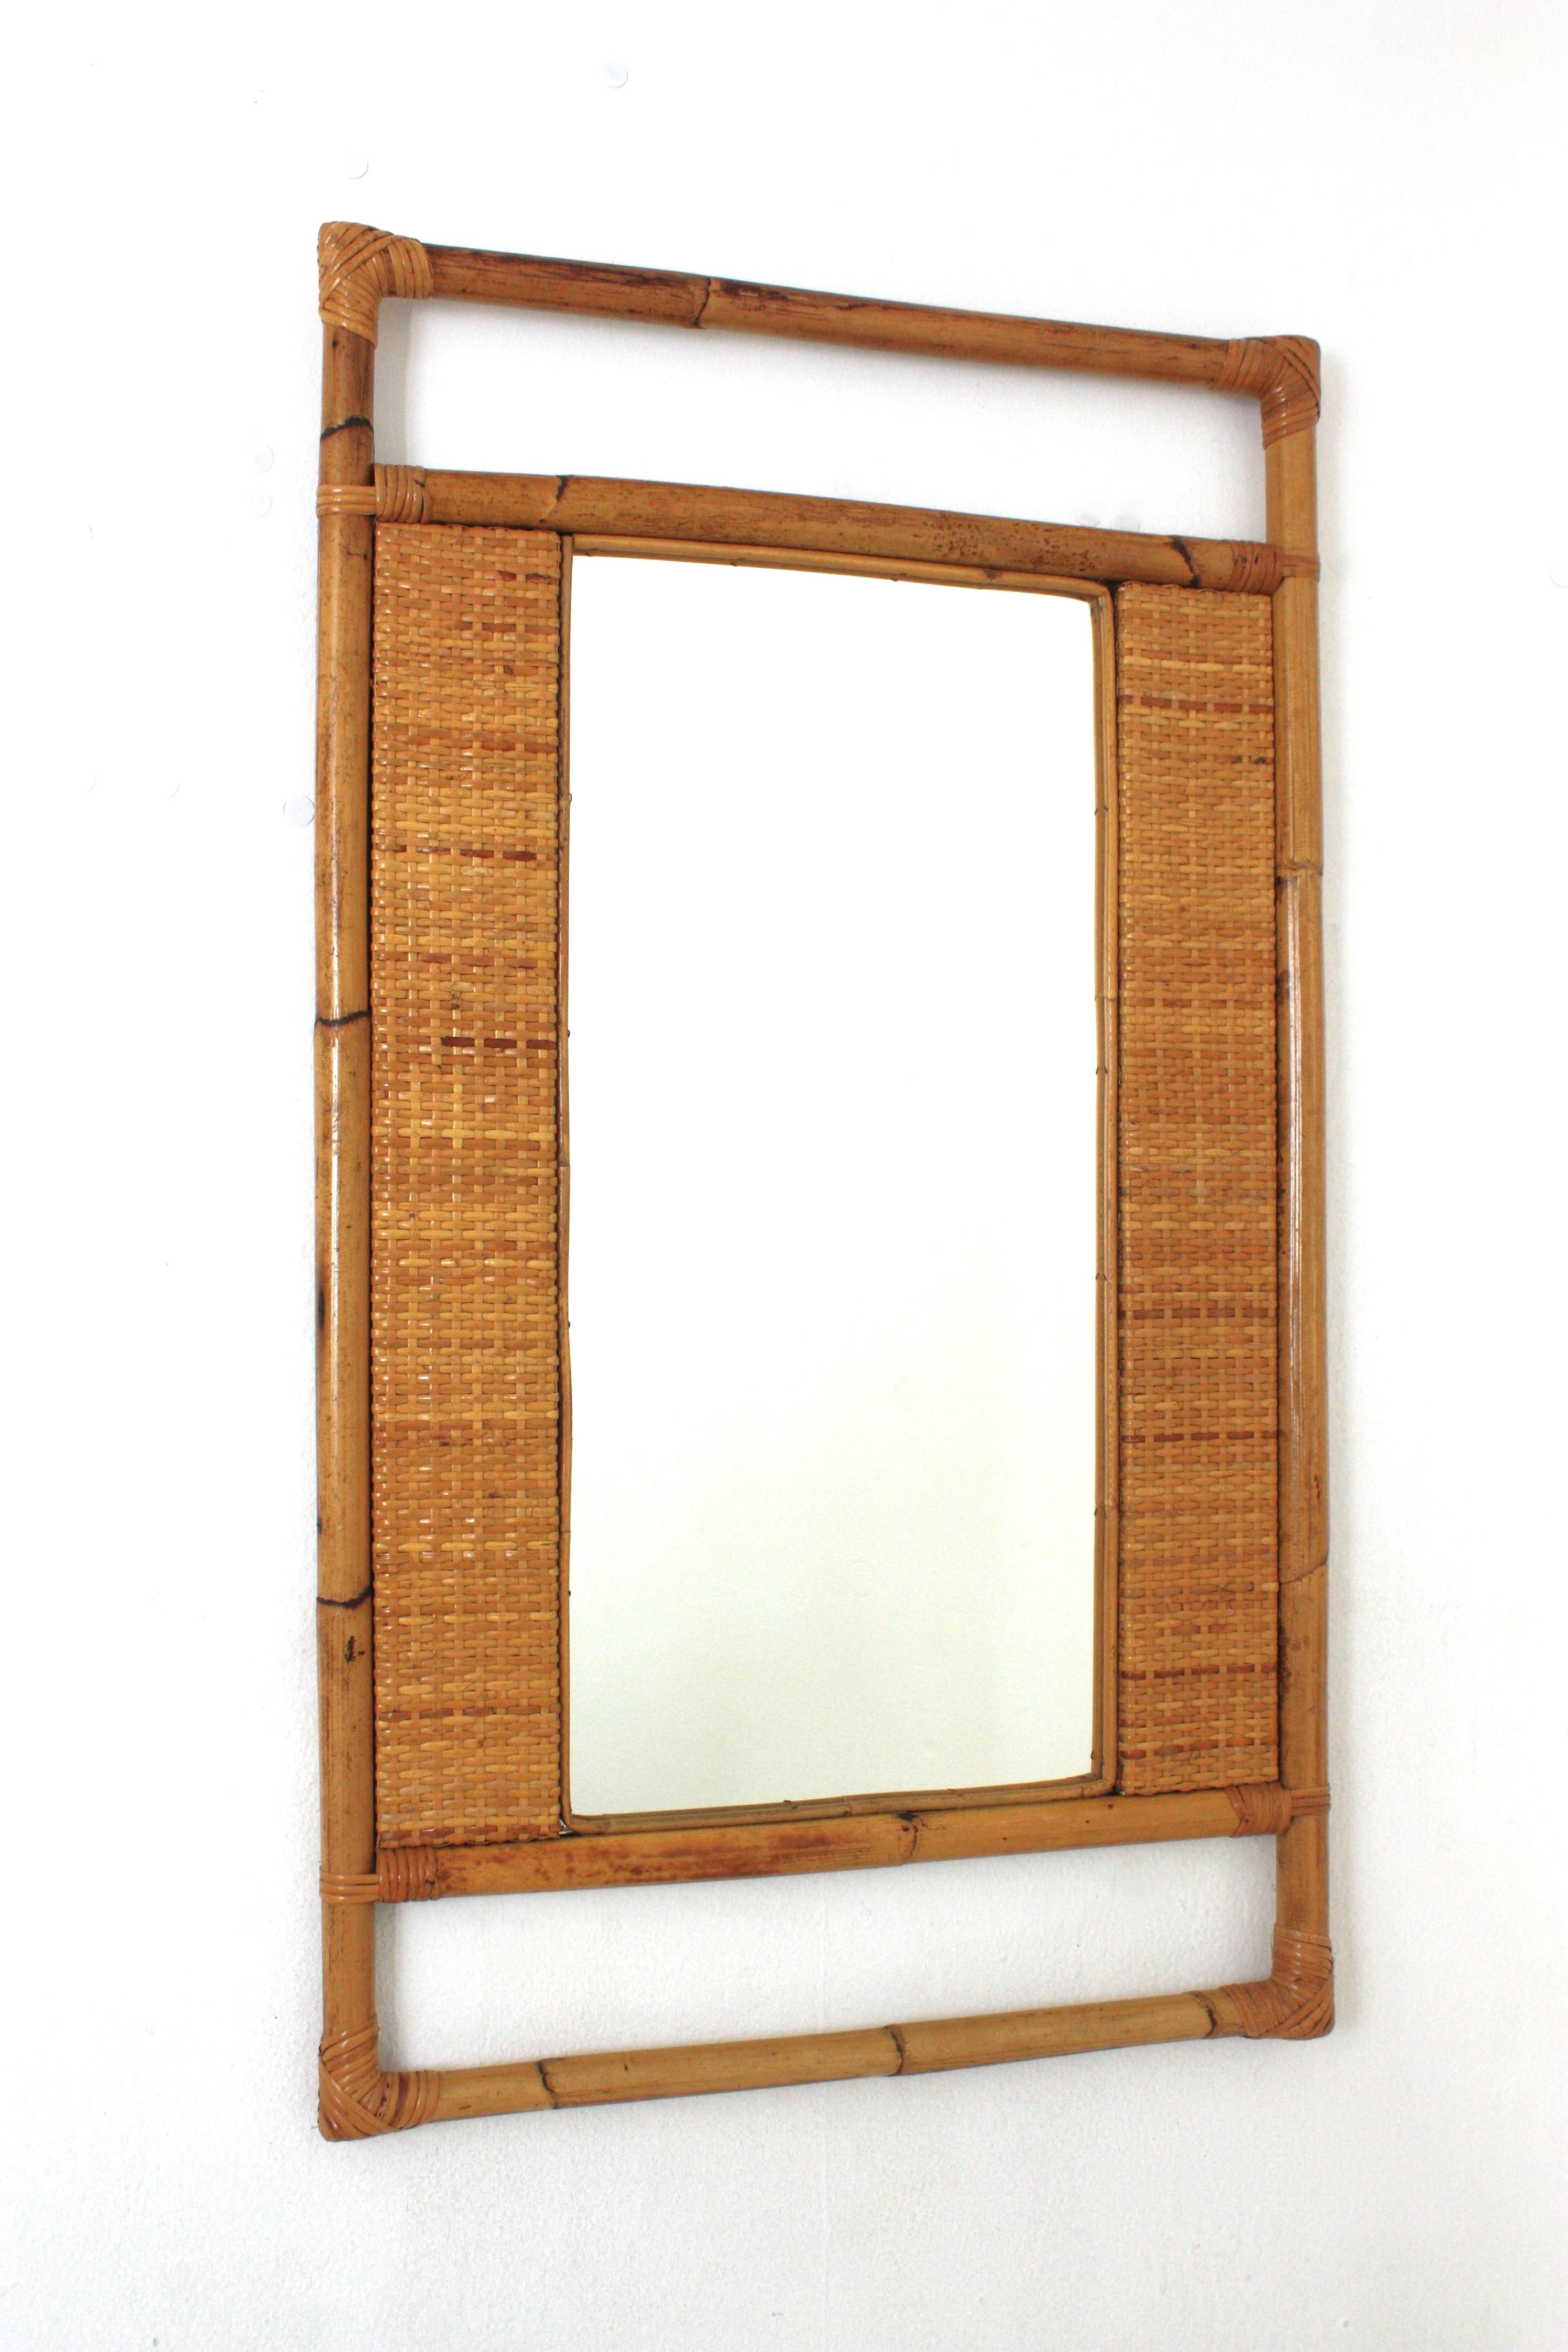 Bamboo Rattan and Woven Wicker Rectangular Mirror, Spain, 1960s.
Eye-catching Coastal rectangular mirror handcrafted rattan bamboo frame and woven wicker panels. 
Highly decorative handcrafted rattan frame with geometric design and Midcentury and